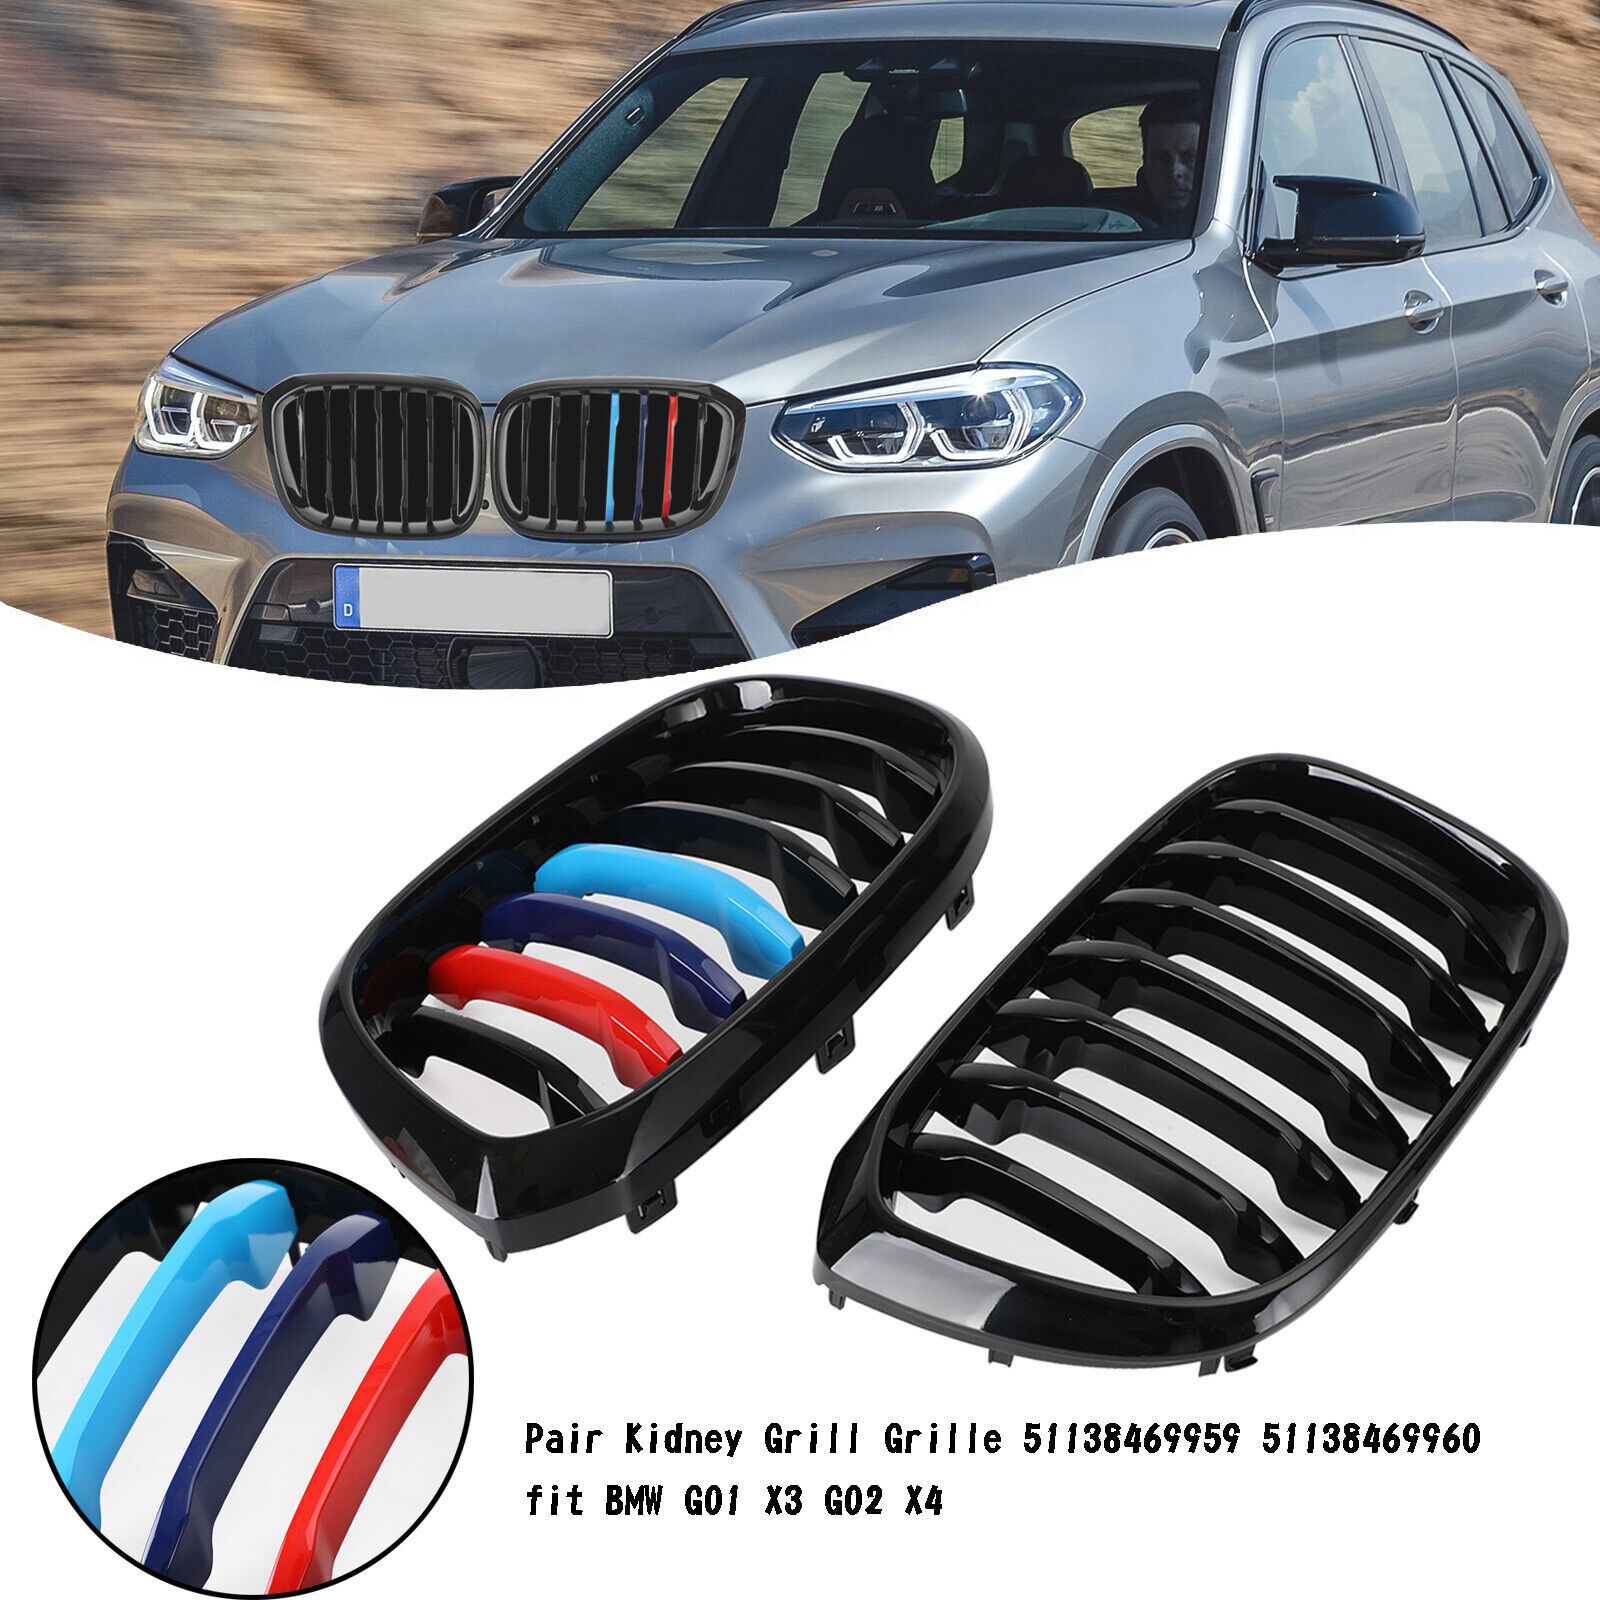 Pair M-Color Kidney Grill Grille 51138469959 Fits BMW G01 X3 G02 X4 Gloss Black